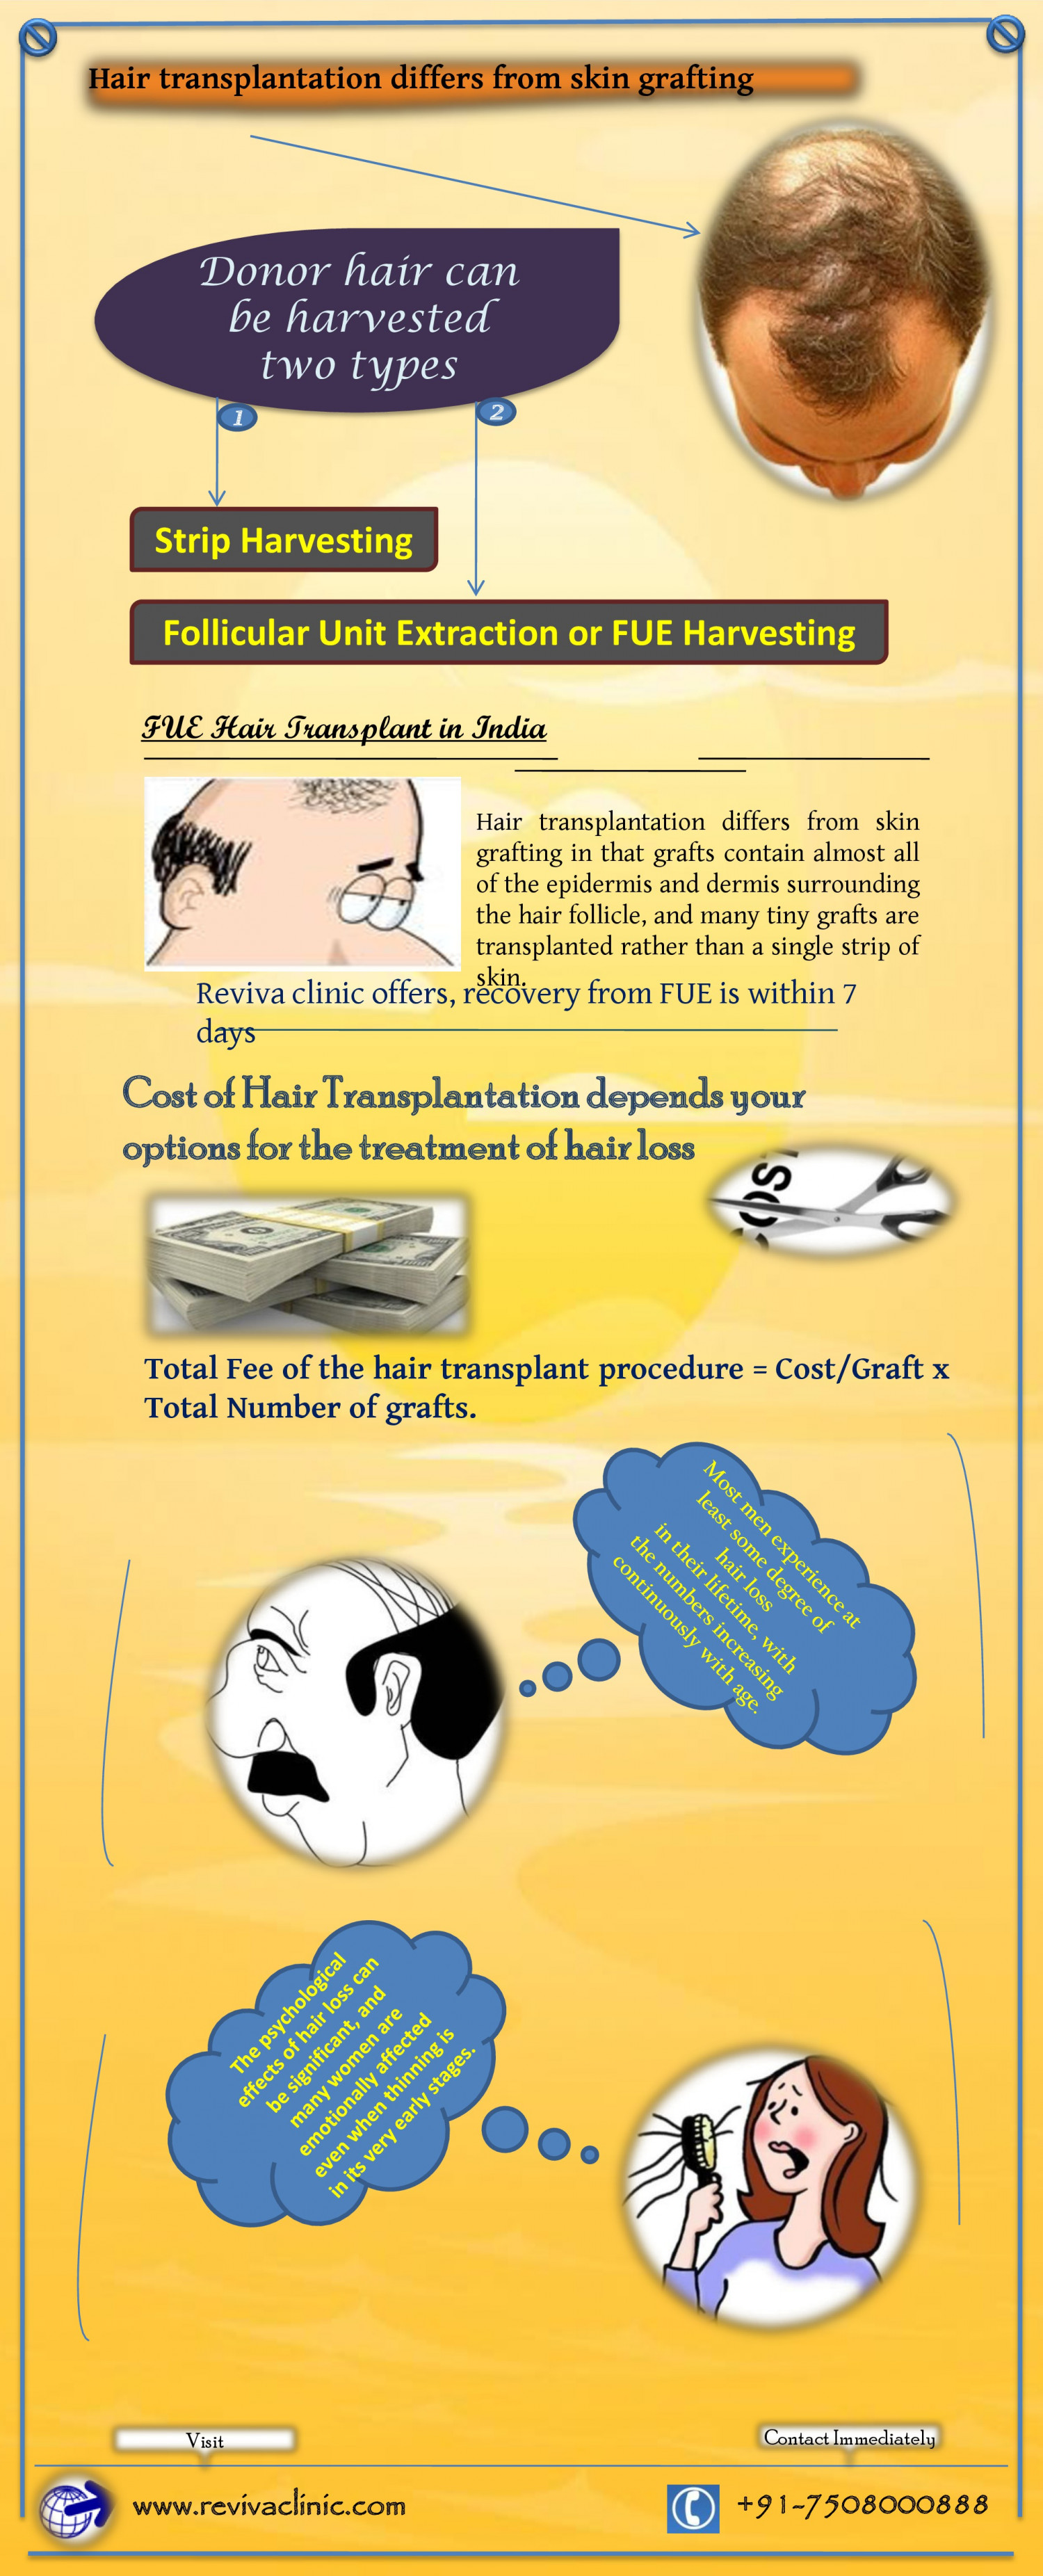 Hair Transplantation differs from skin Grafting Infographic